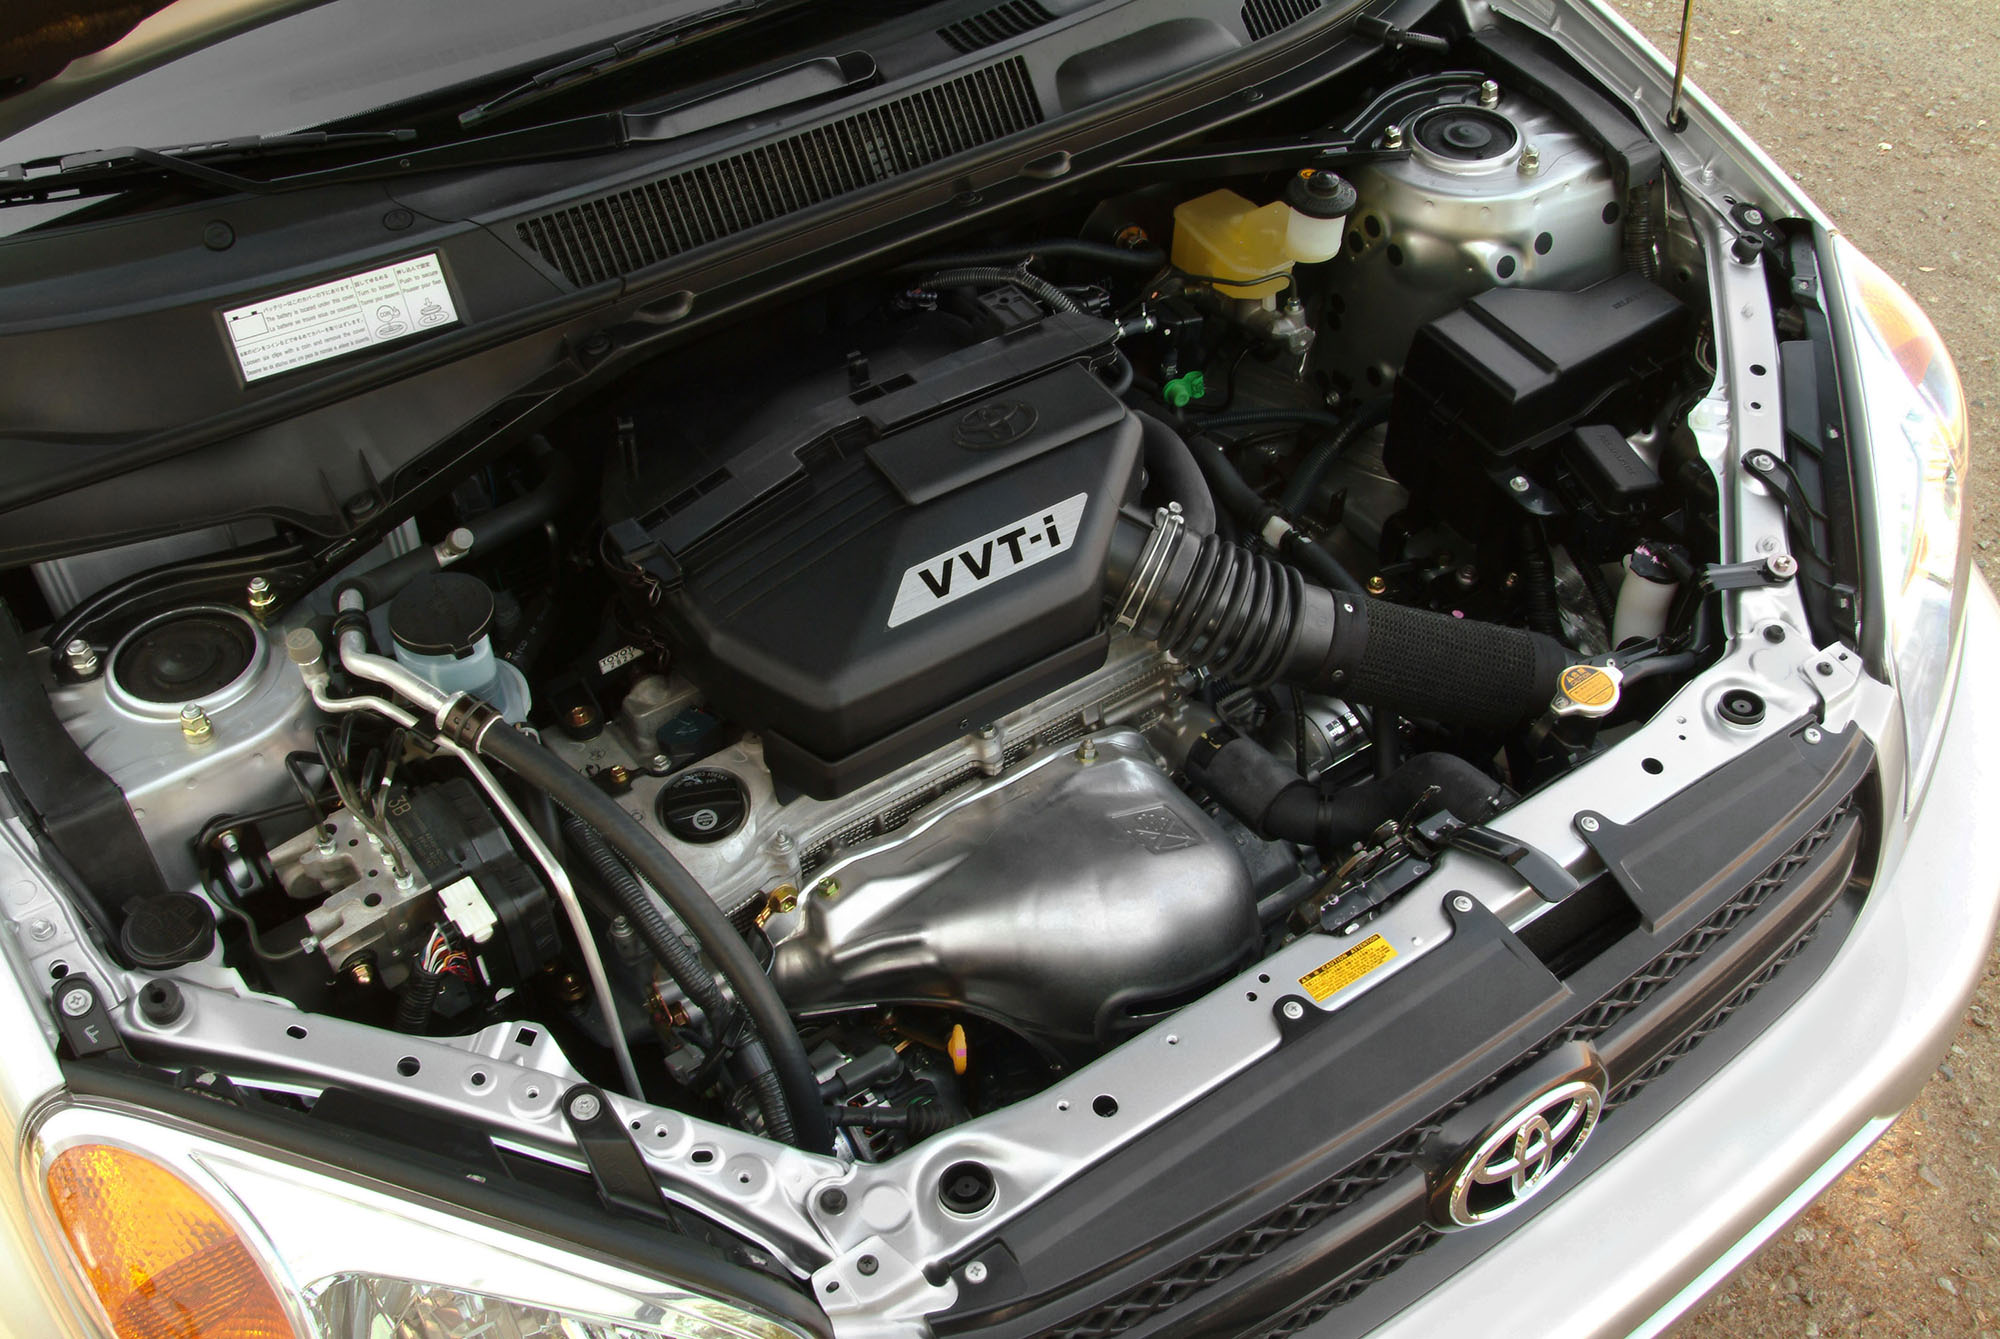 Toyota RAV4 with hood open and engine exposed